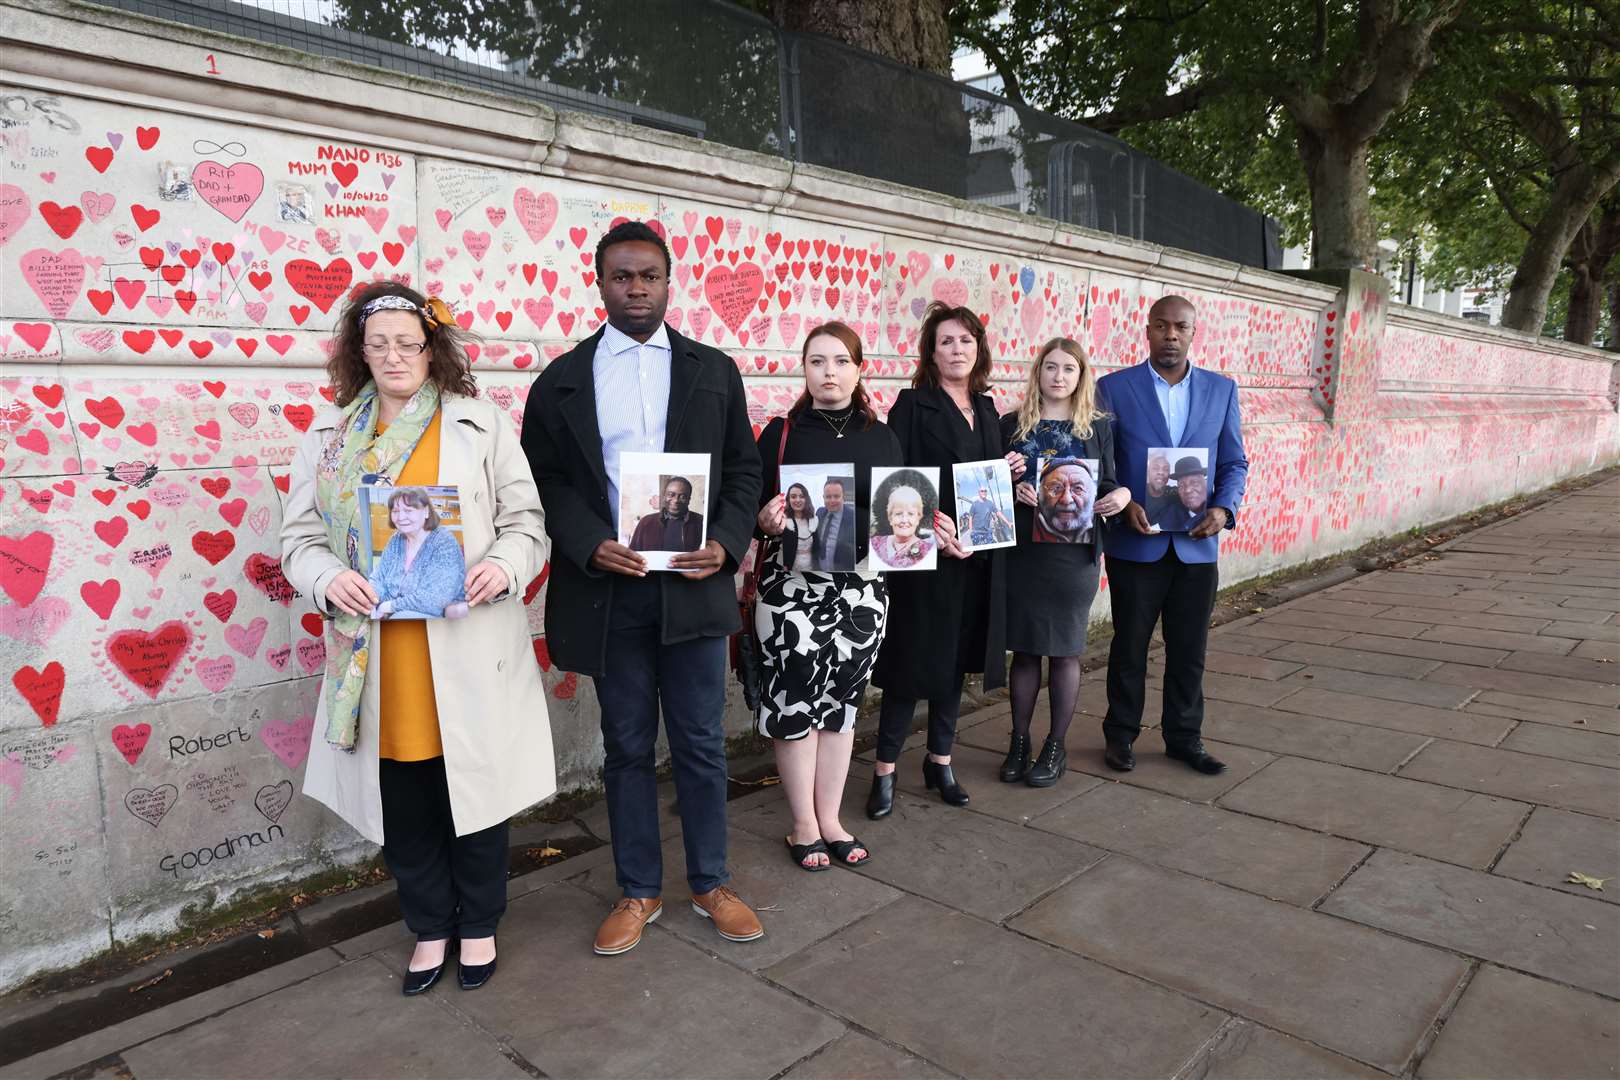 Bereaved people at the memorial wall (James Manning/PA)